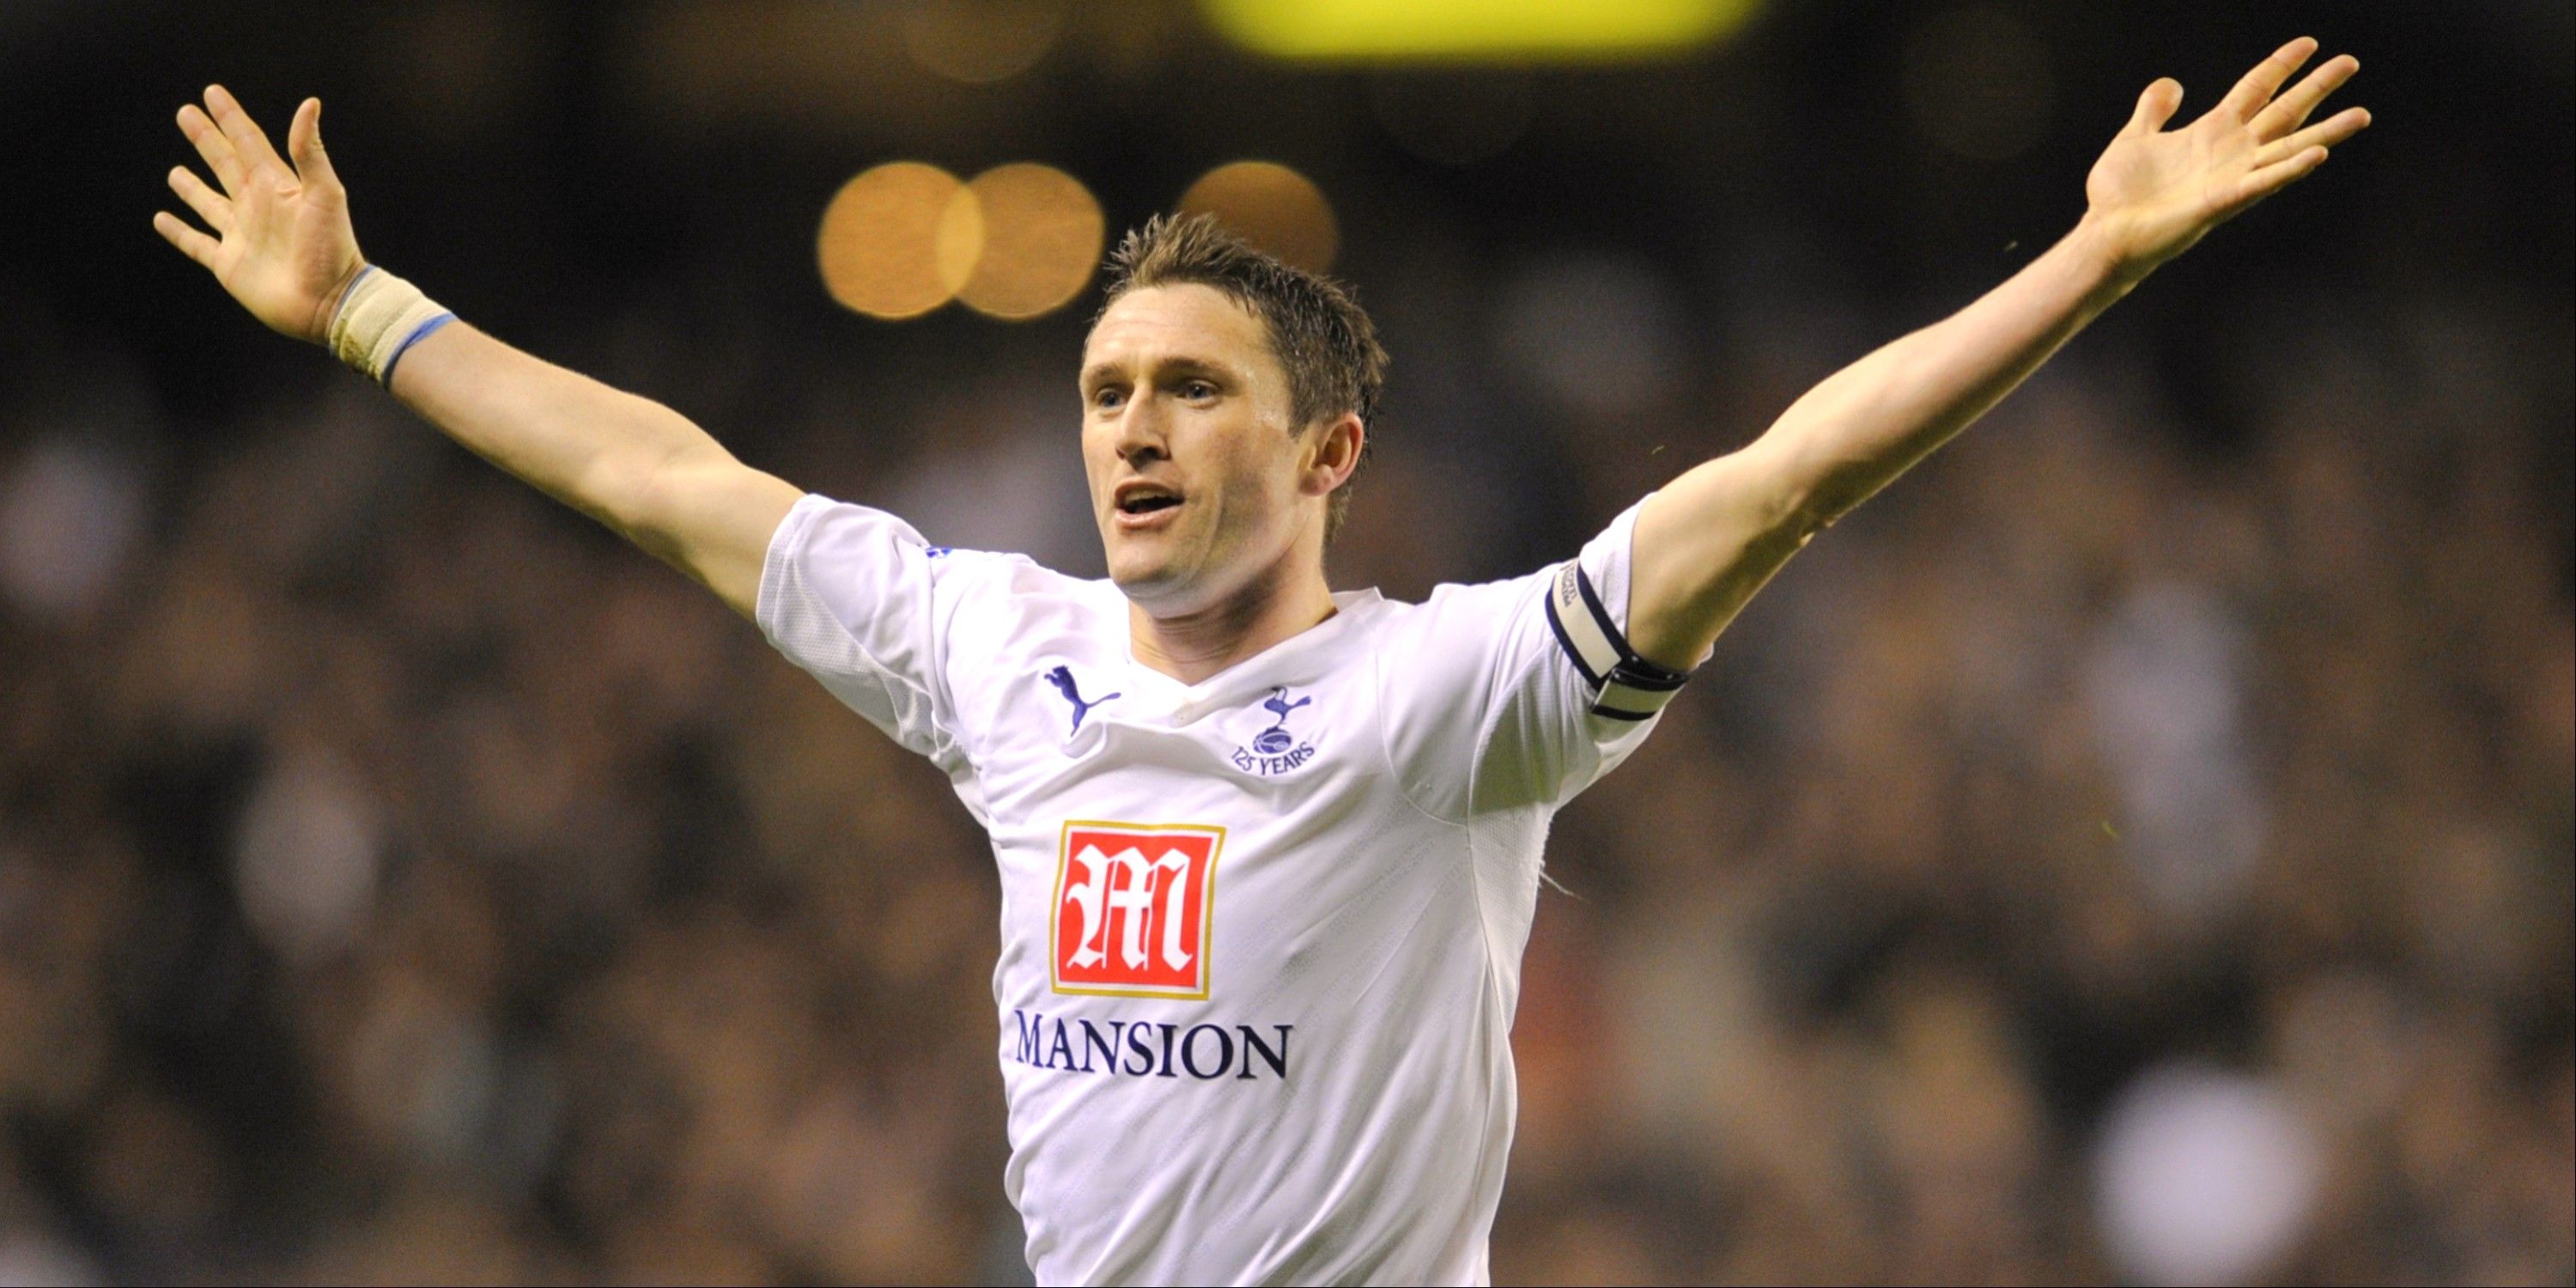 Robbie Keane celebrates scoring for Tottenham with his arms outstretched. 